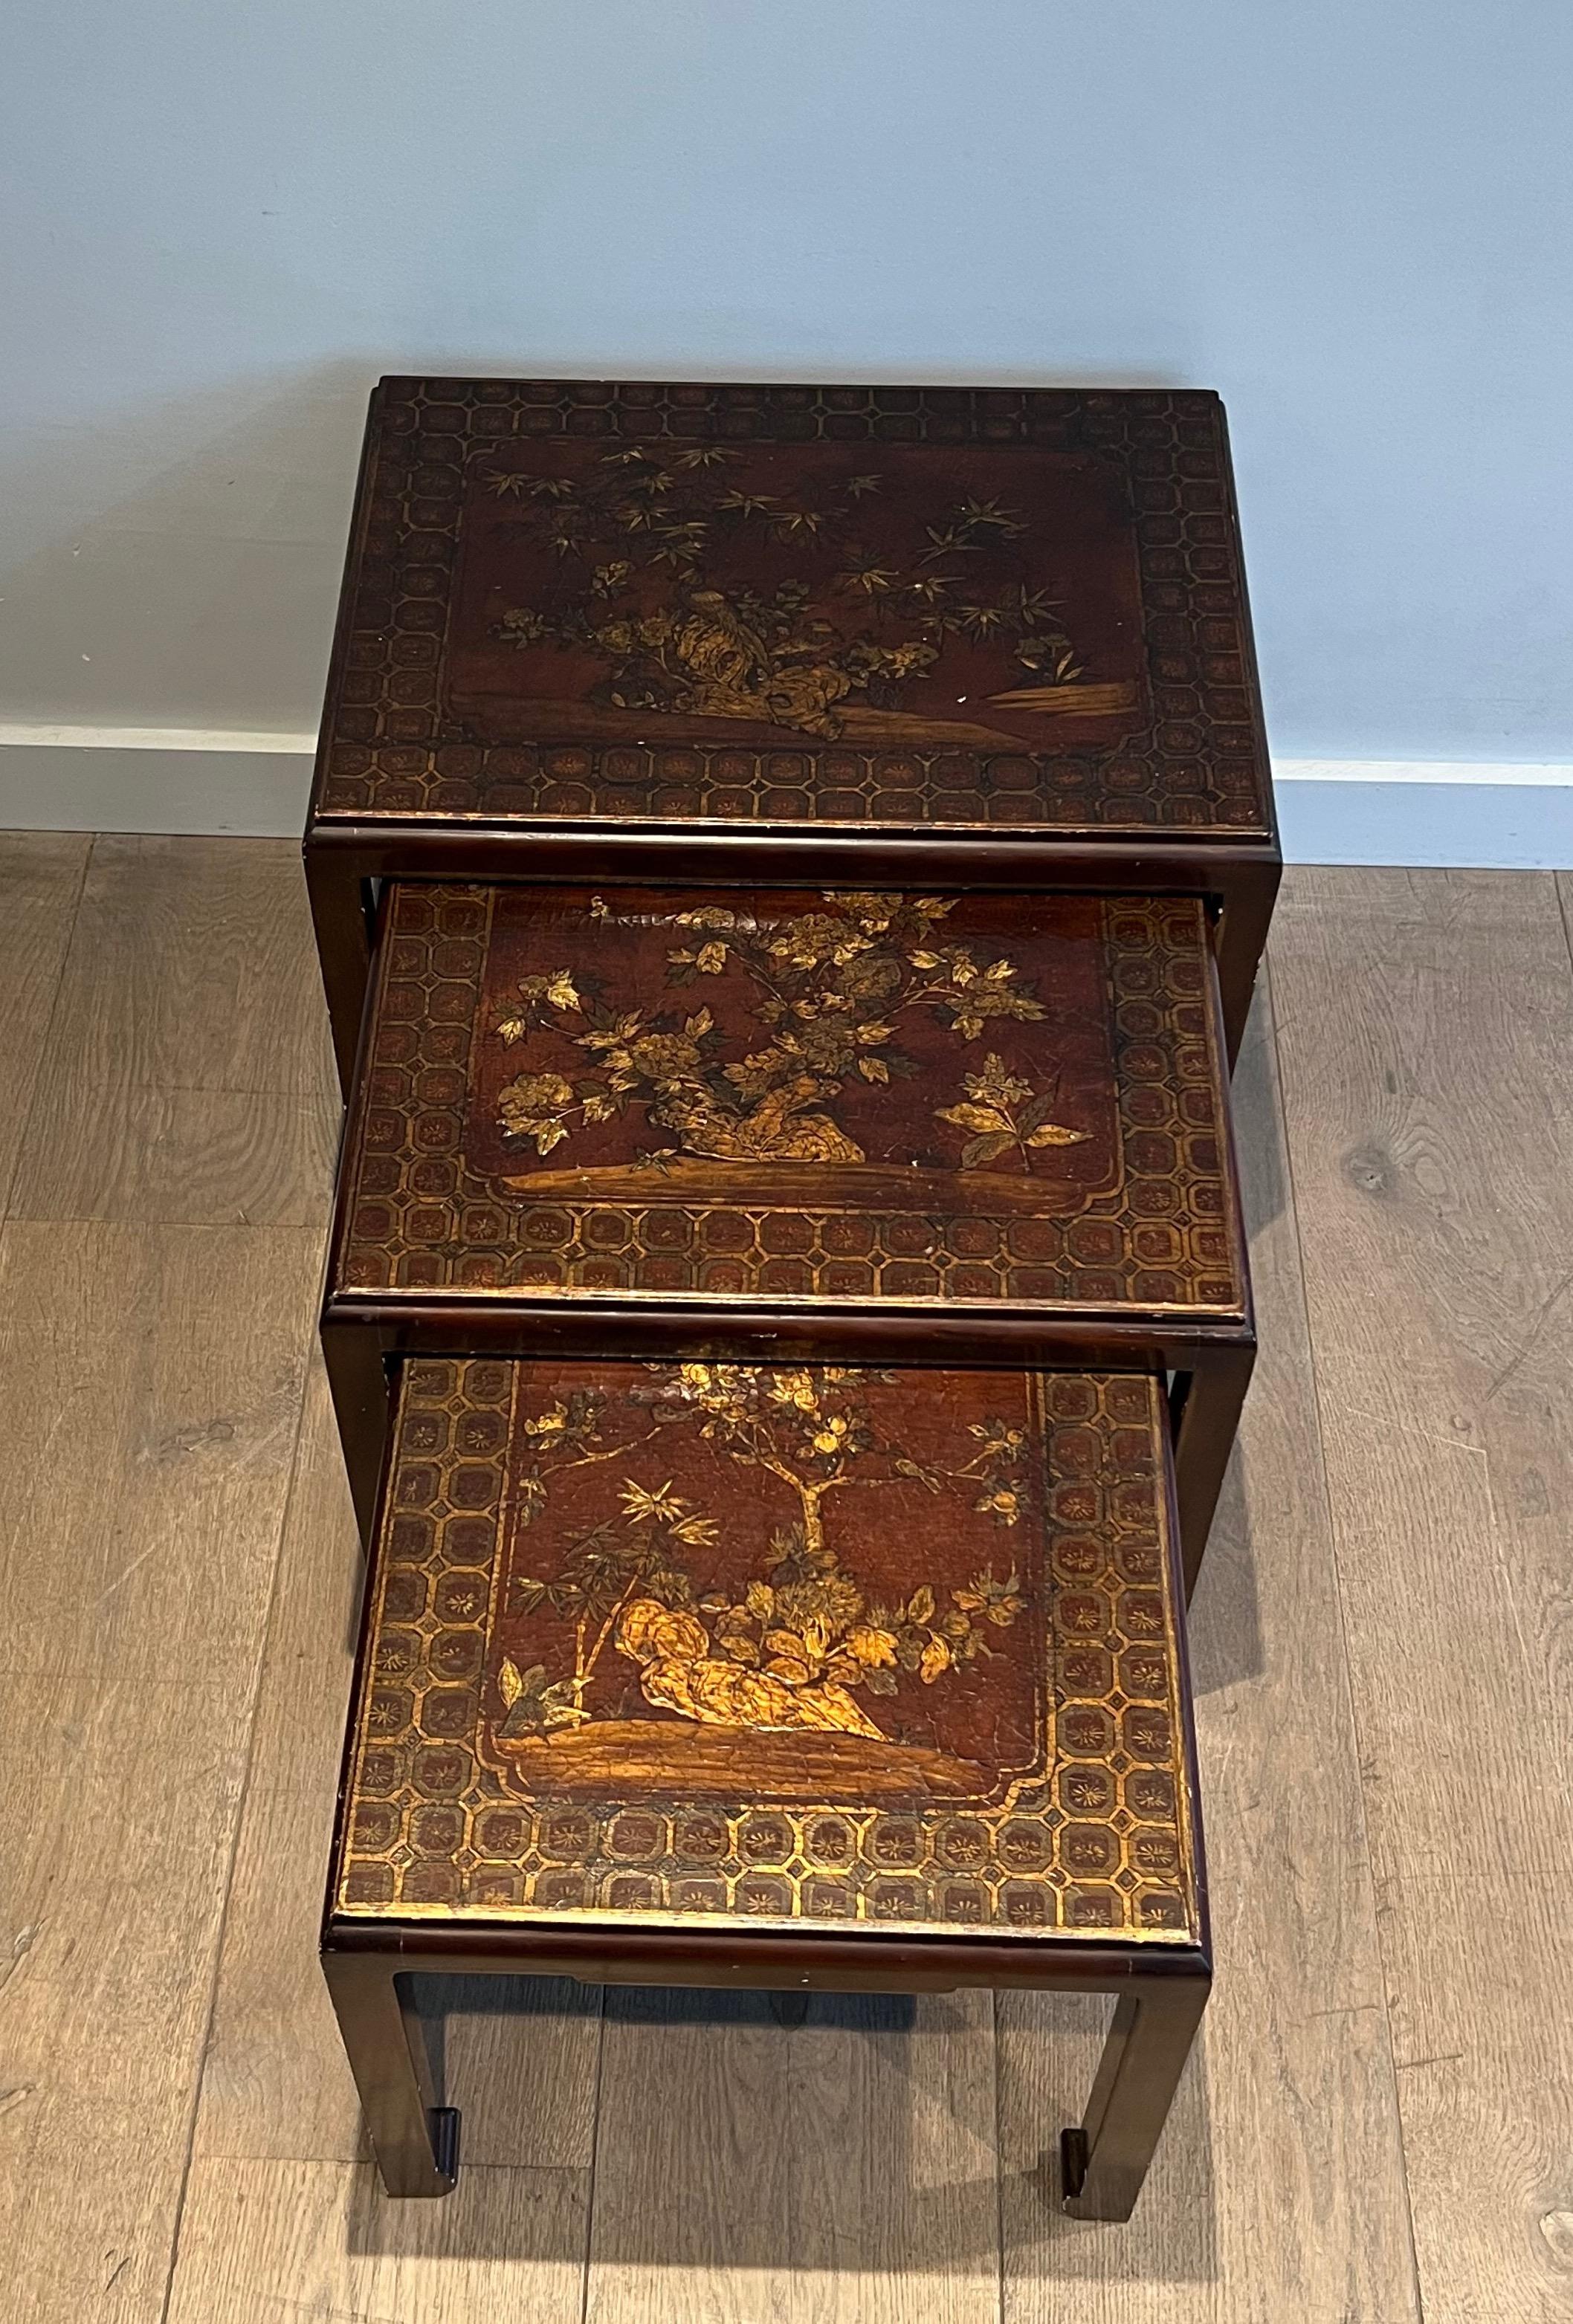 This very nice set of three nesting tables is made of a lacquered wood in the bordeaux tones with gilt decors representing Chinese scenes. This is a French work. Circa 1940.